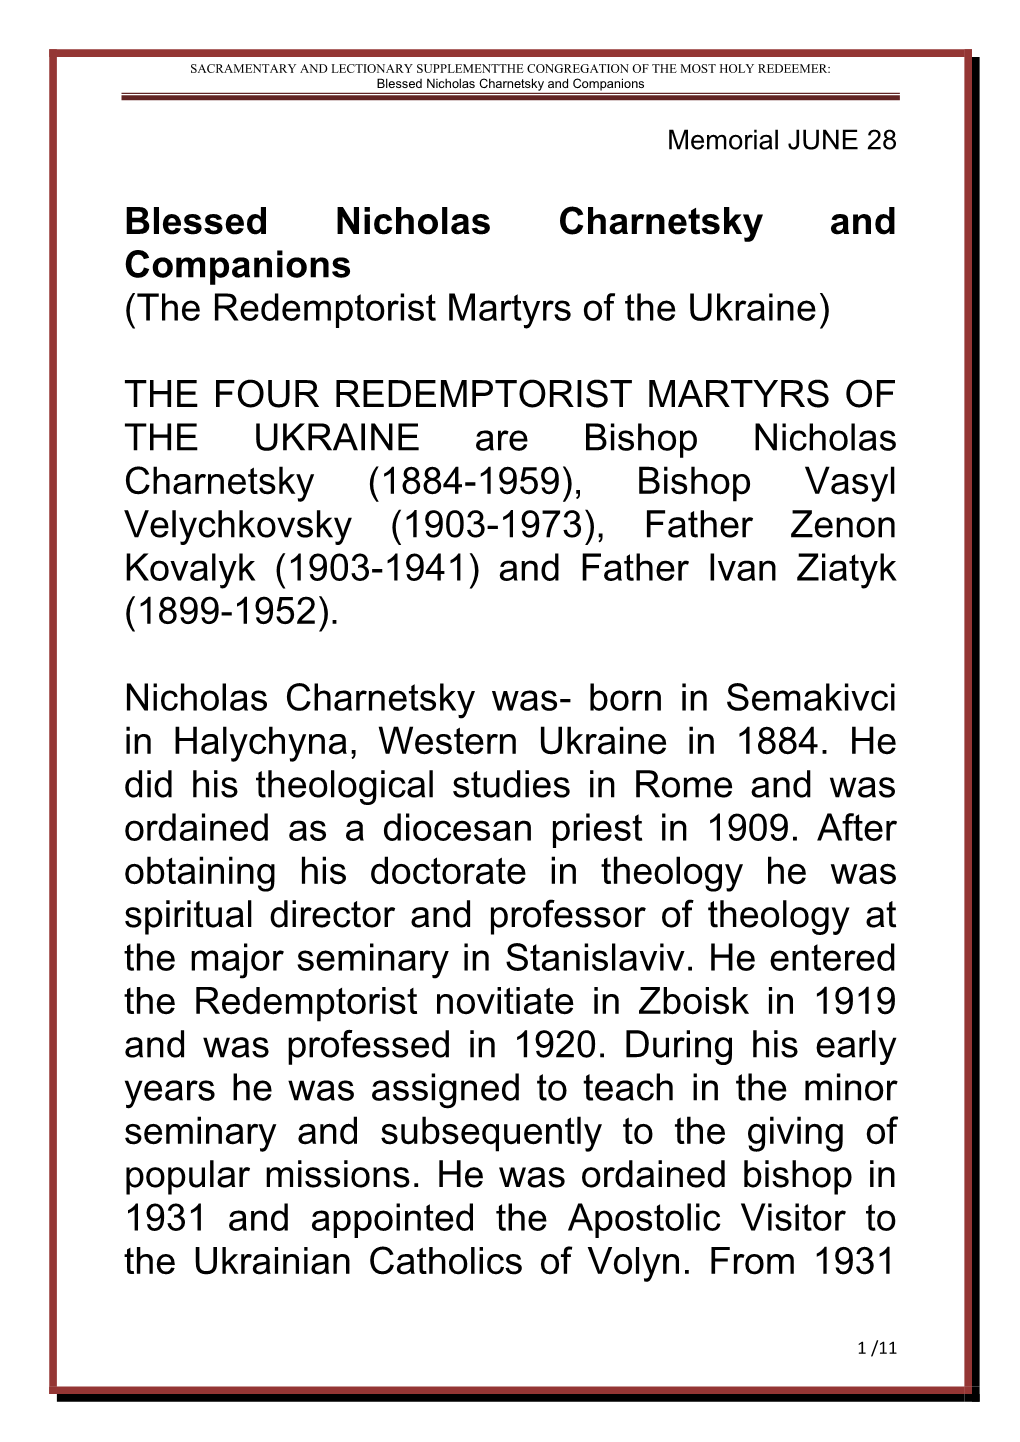 SACRAMENTARY and LECTIONARY SUPPLEMENTTHE CONGREGATION of the MOST HOLY REDEEMER: Blessed Nicholas Charnetsky and Companions